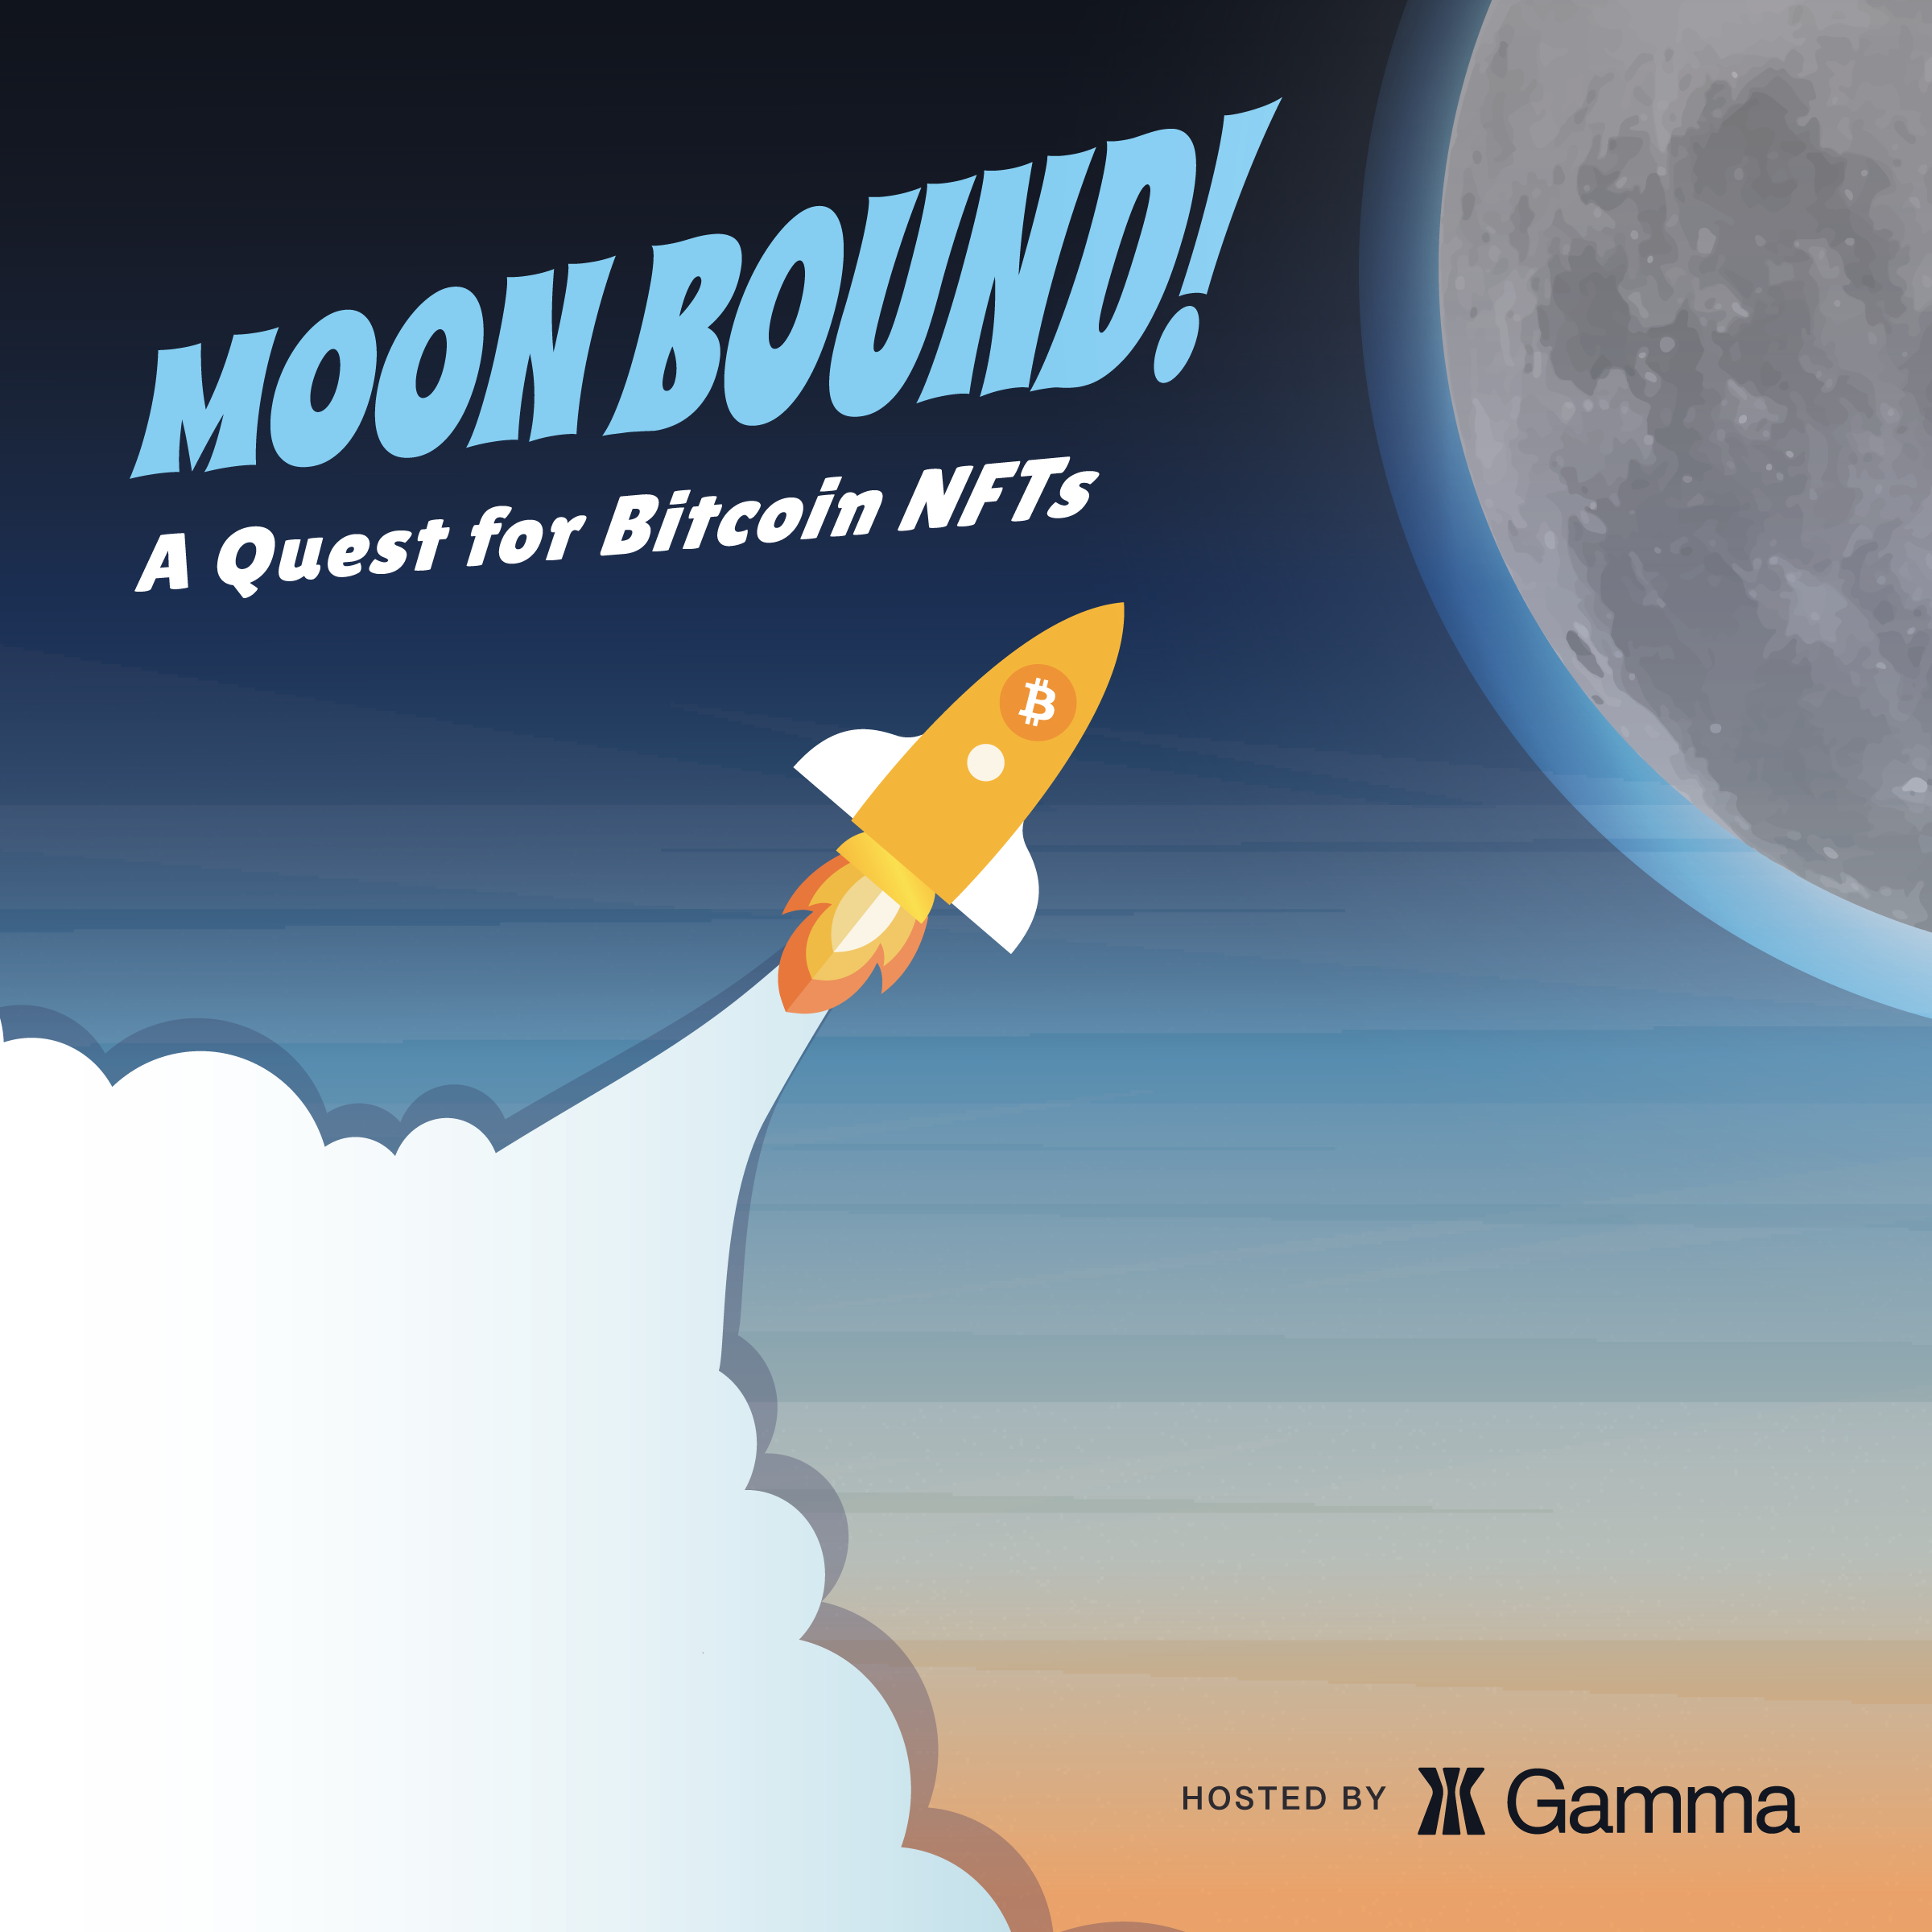 Moon_Bound_-_A_Quest_for_Bitcoin_NFTs_Promo_Image_v2.png